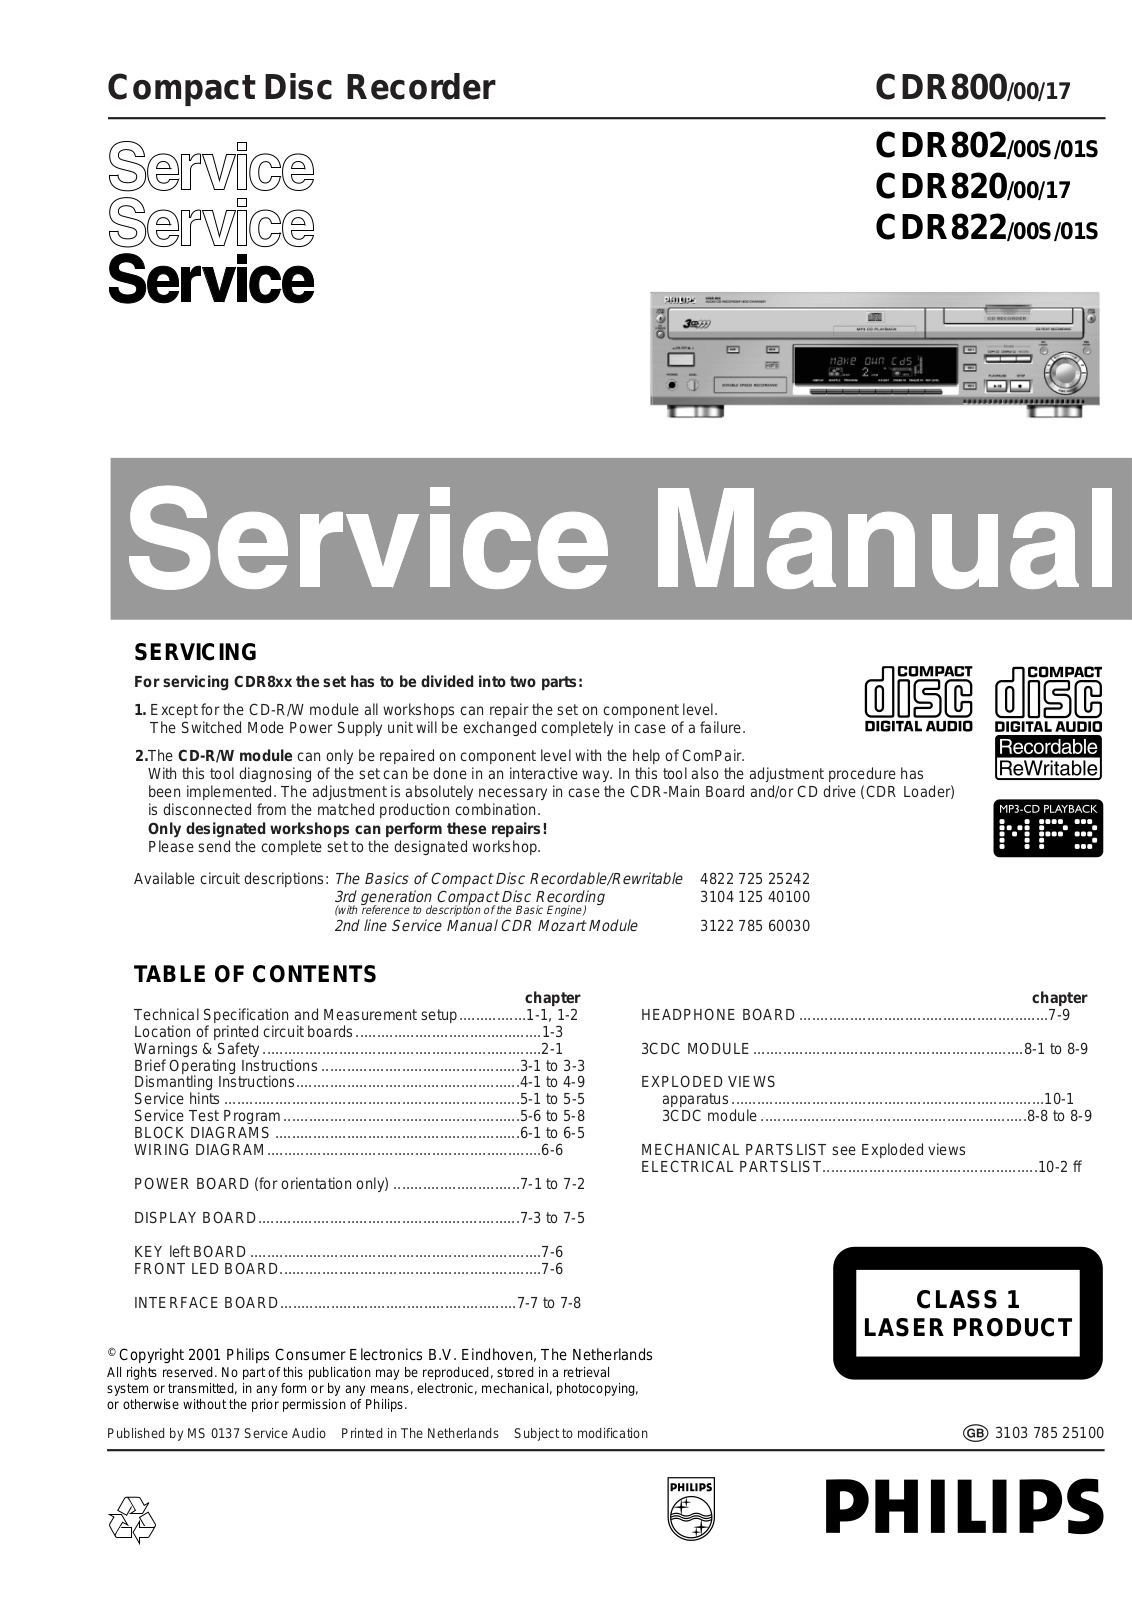 Philips CDR-800, CDR-802, CDR-820, CDR-822 Service manual